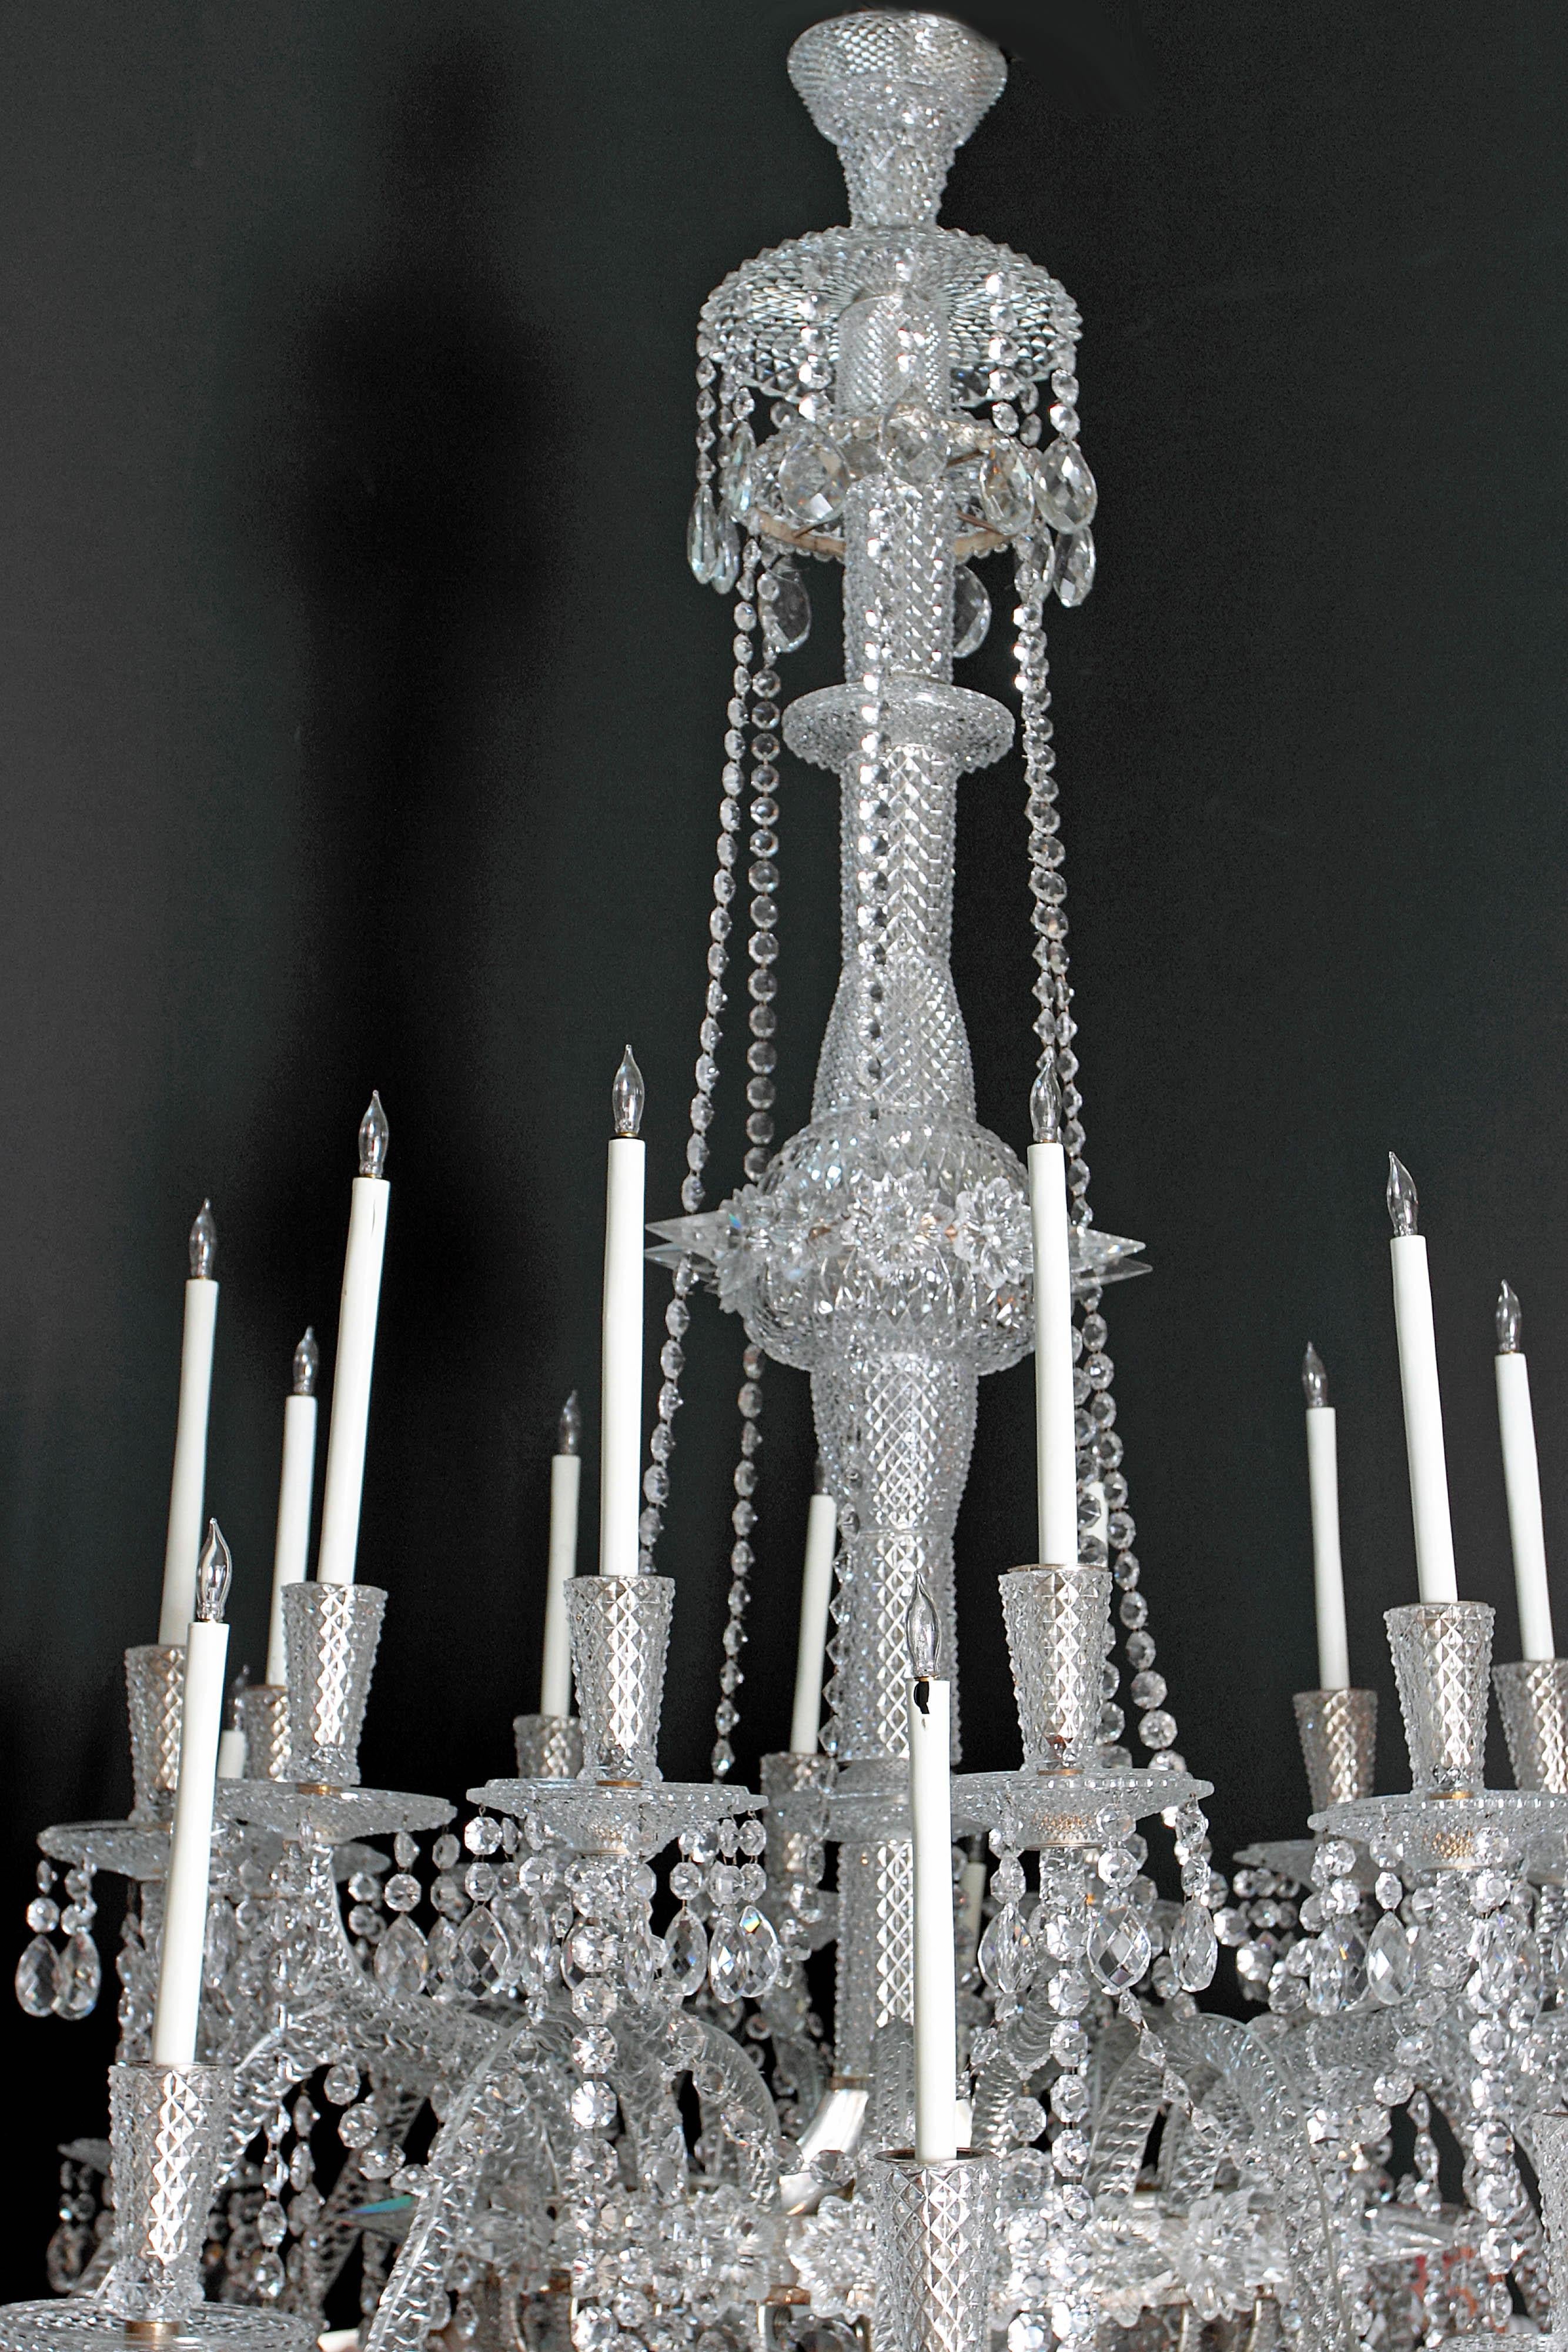 Pair of Grand Scale Mid-Victorian 24-Light Cut-Crystal Chandeliers For Sale 6